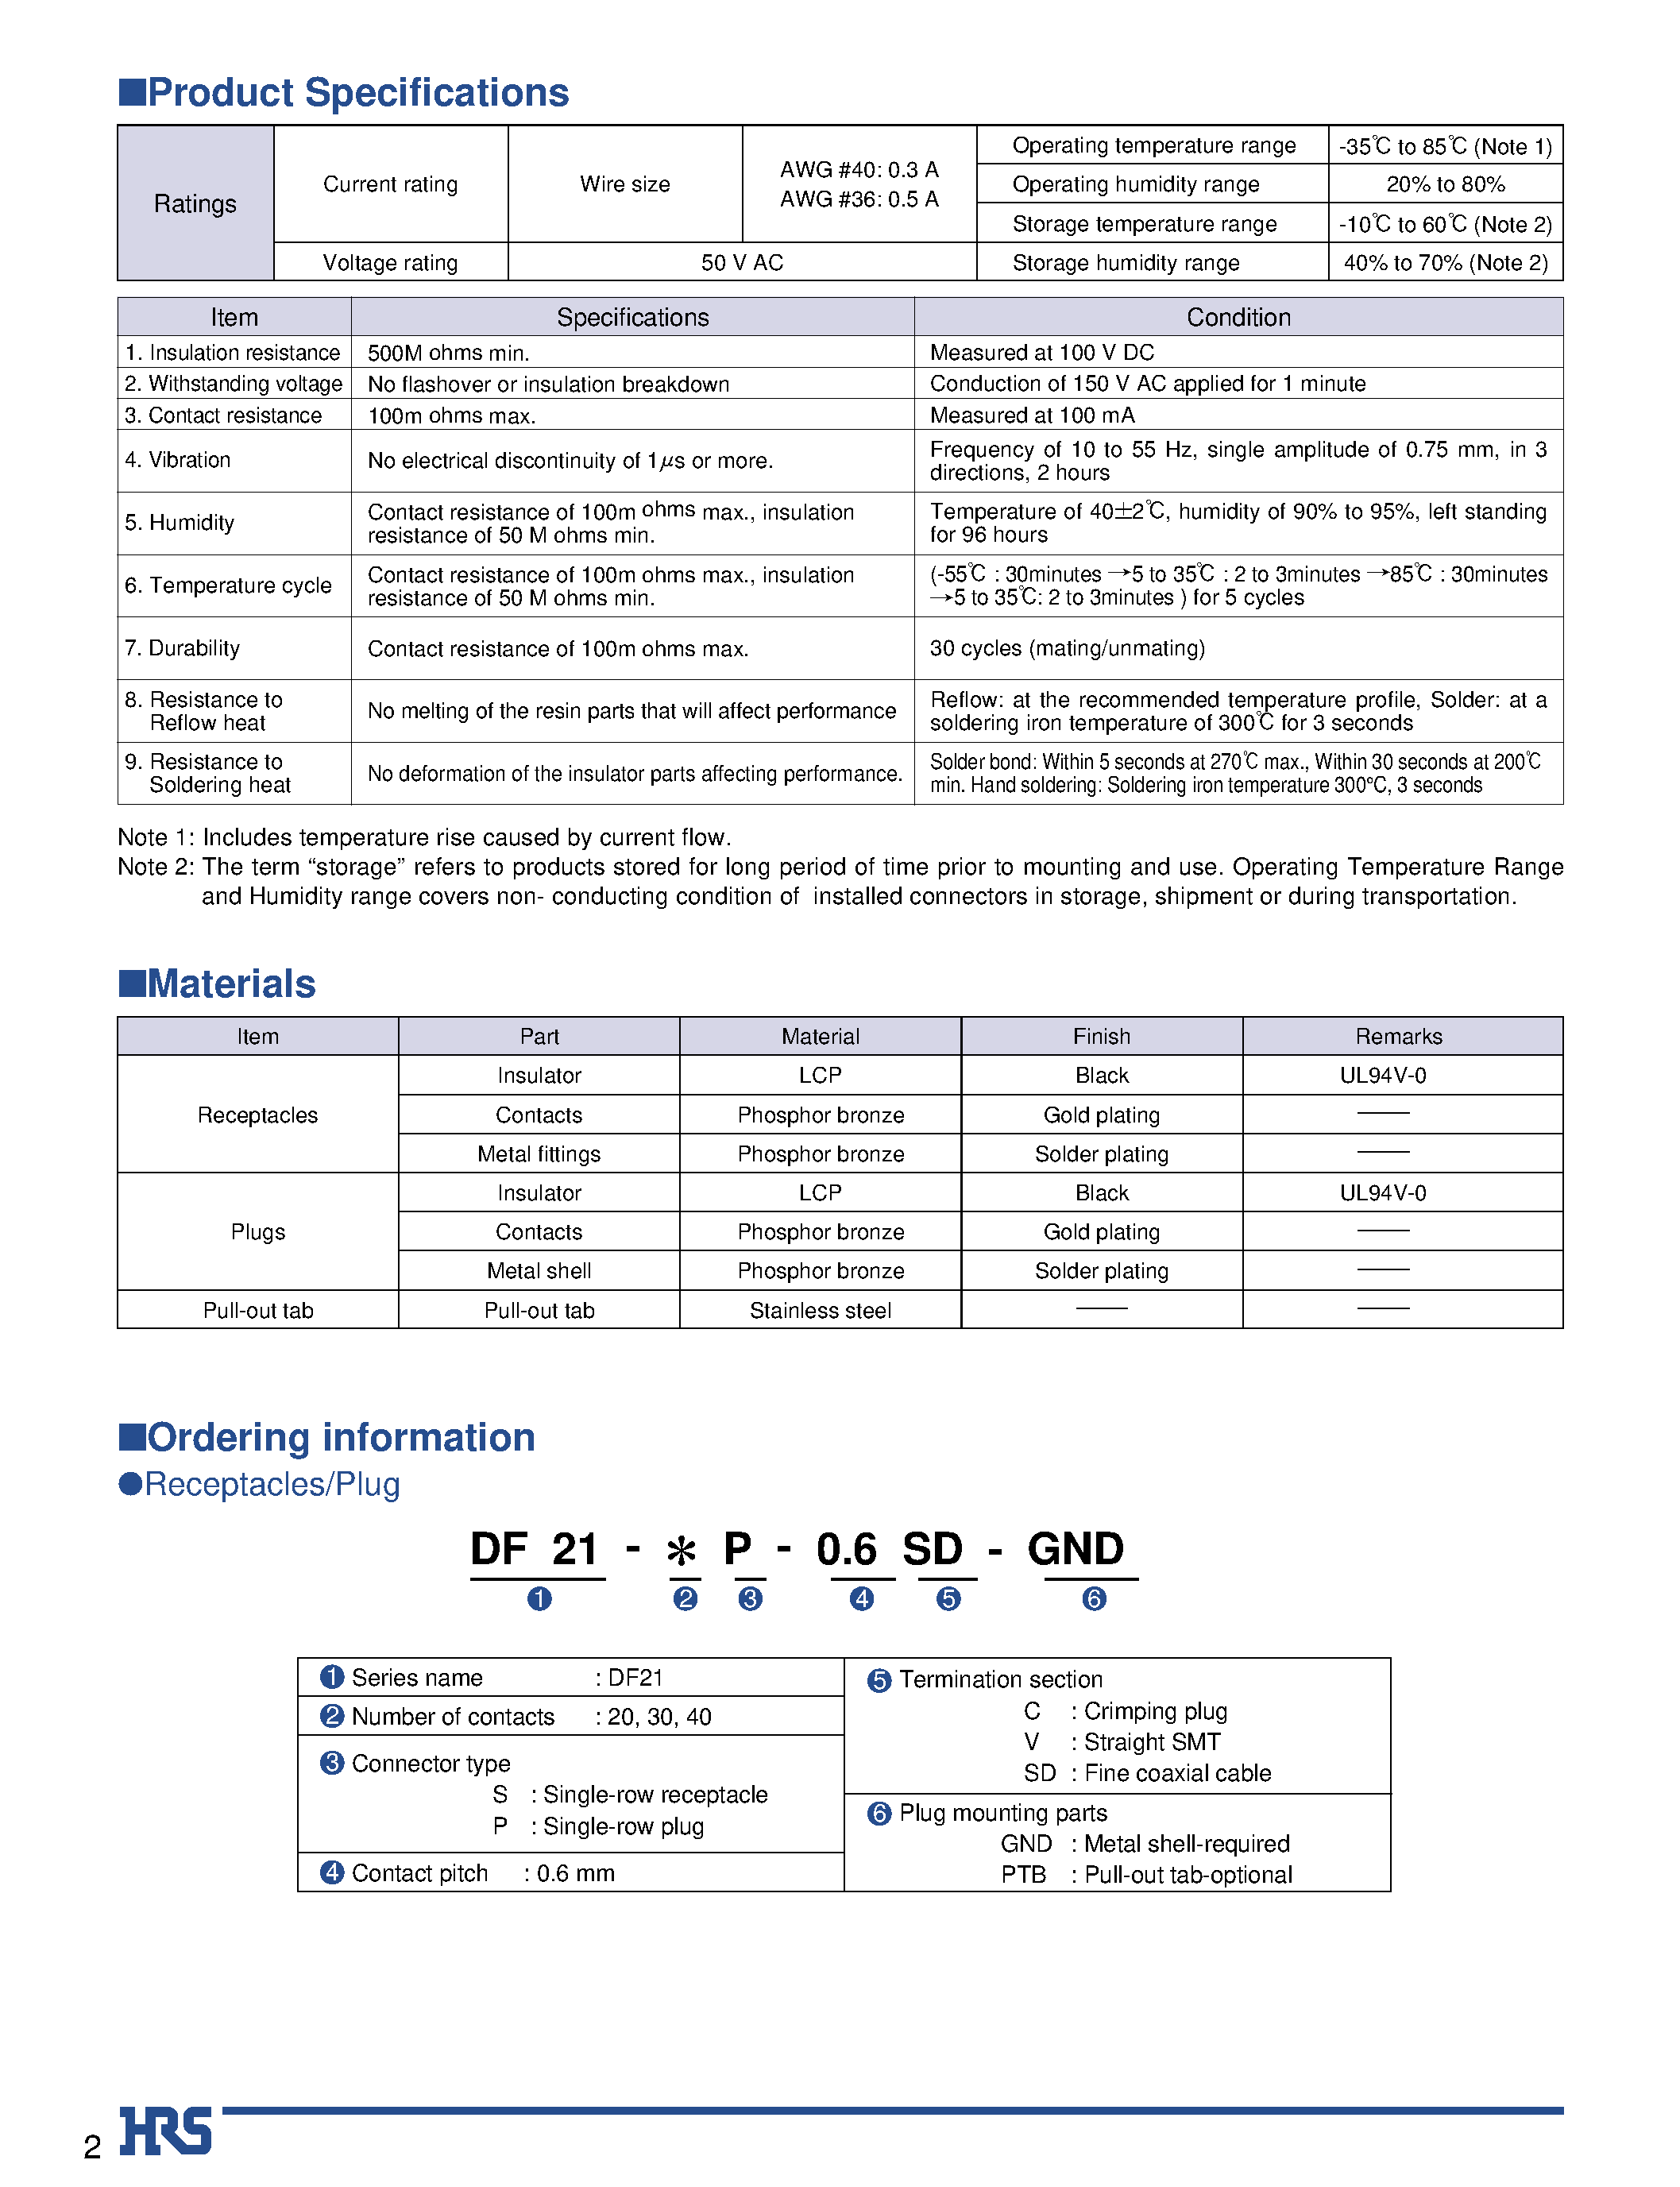 Datasheet DF21-20P-0.6SD-GND - 0.6mm Pitch Board-to-Fine-Coaxial Cable Connectors page 2